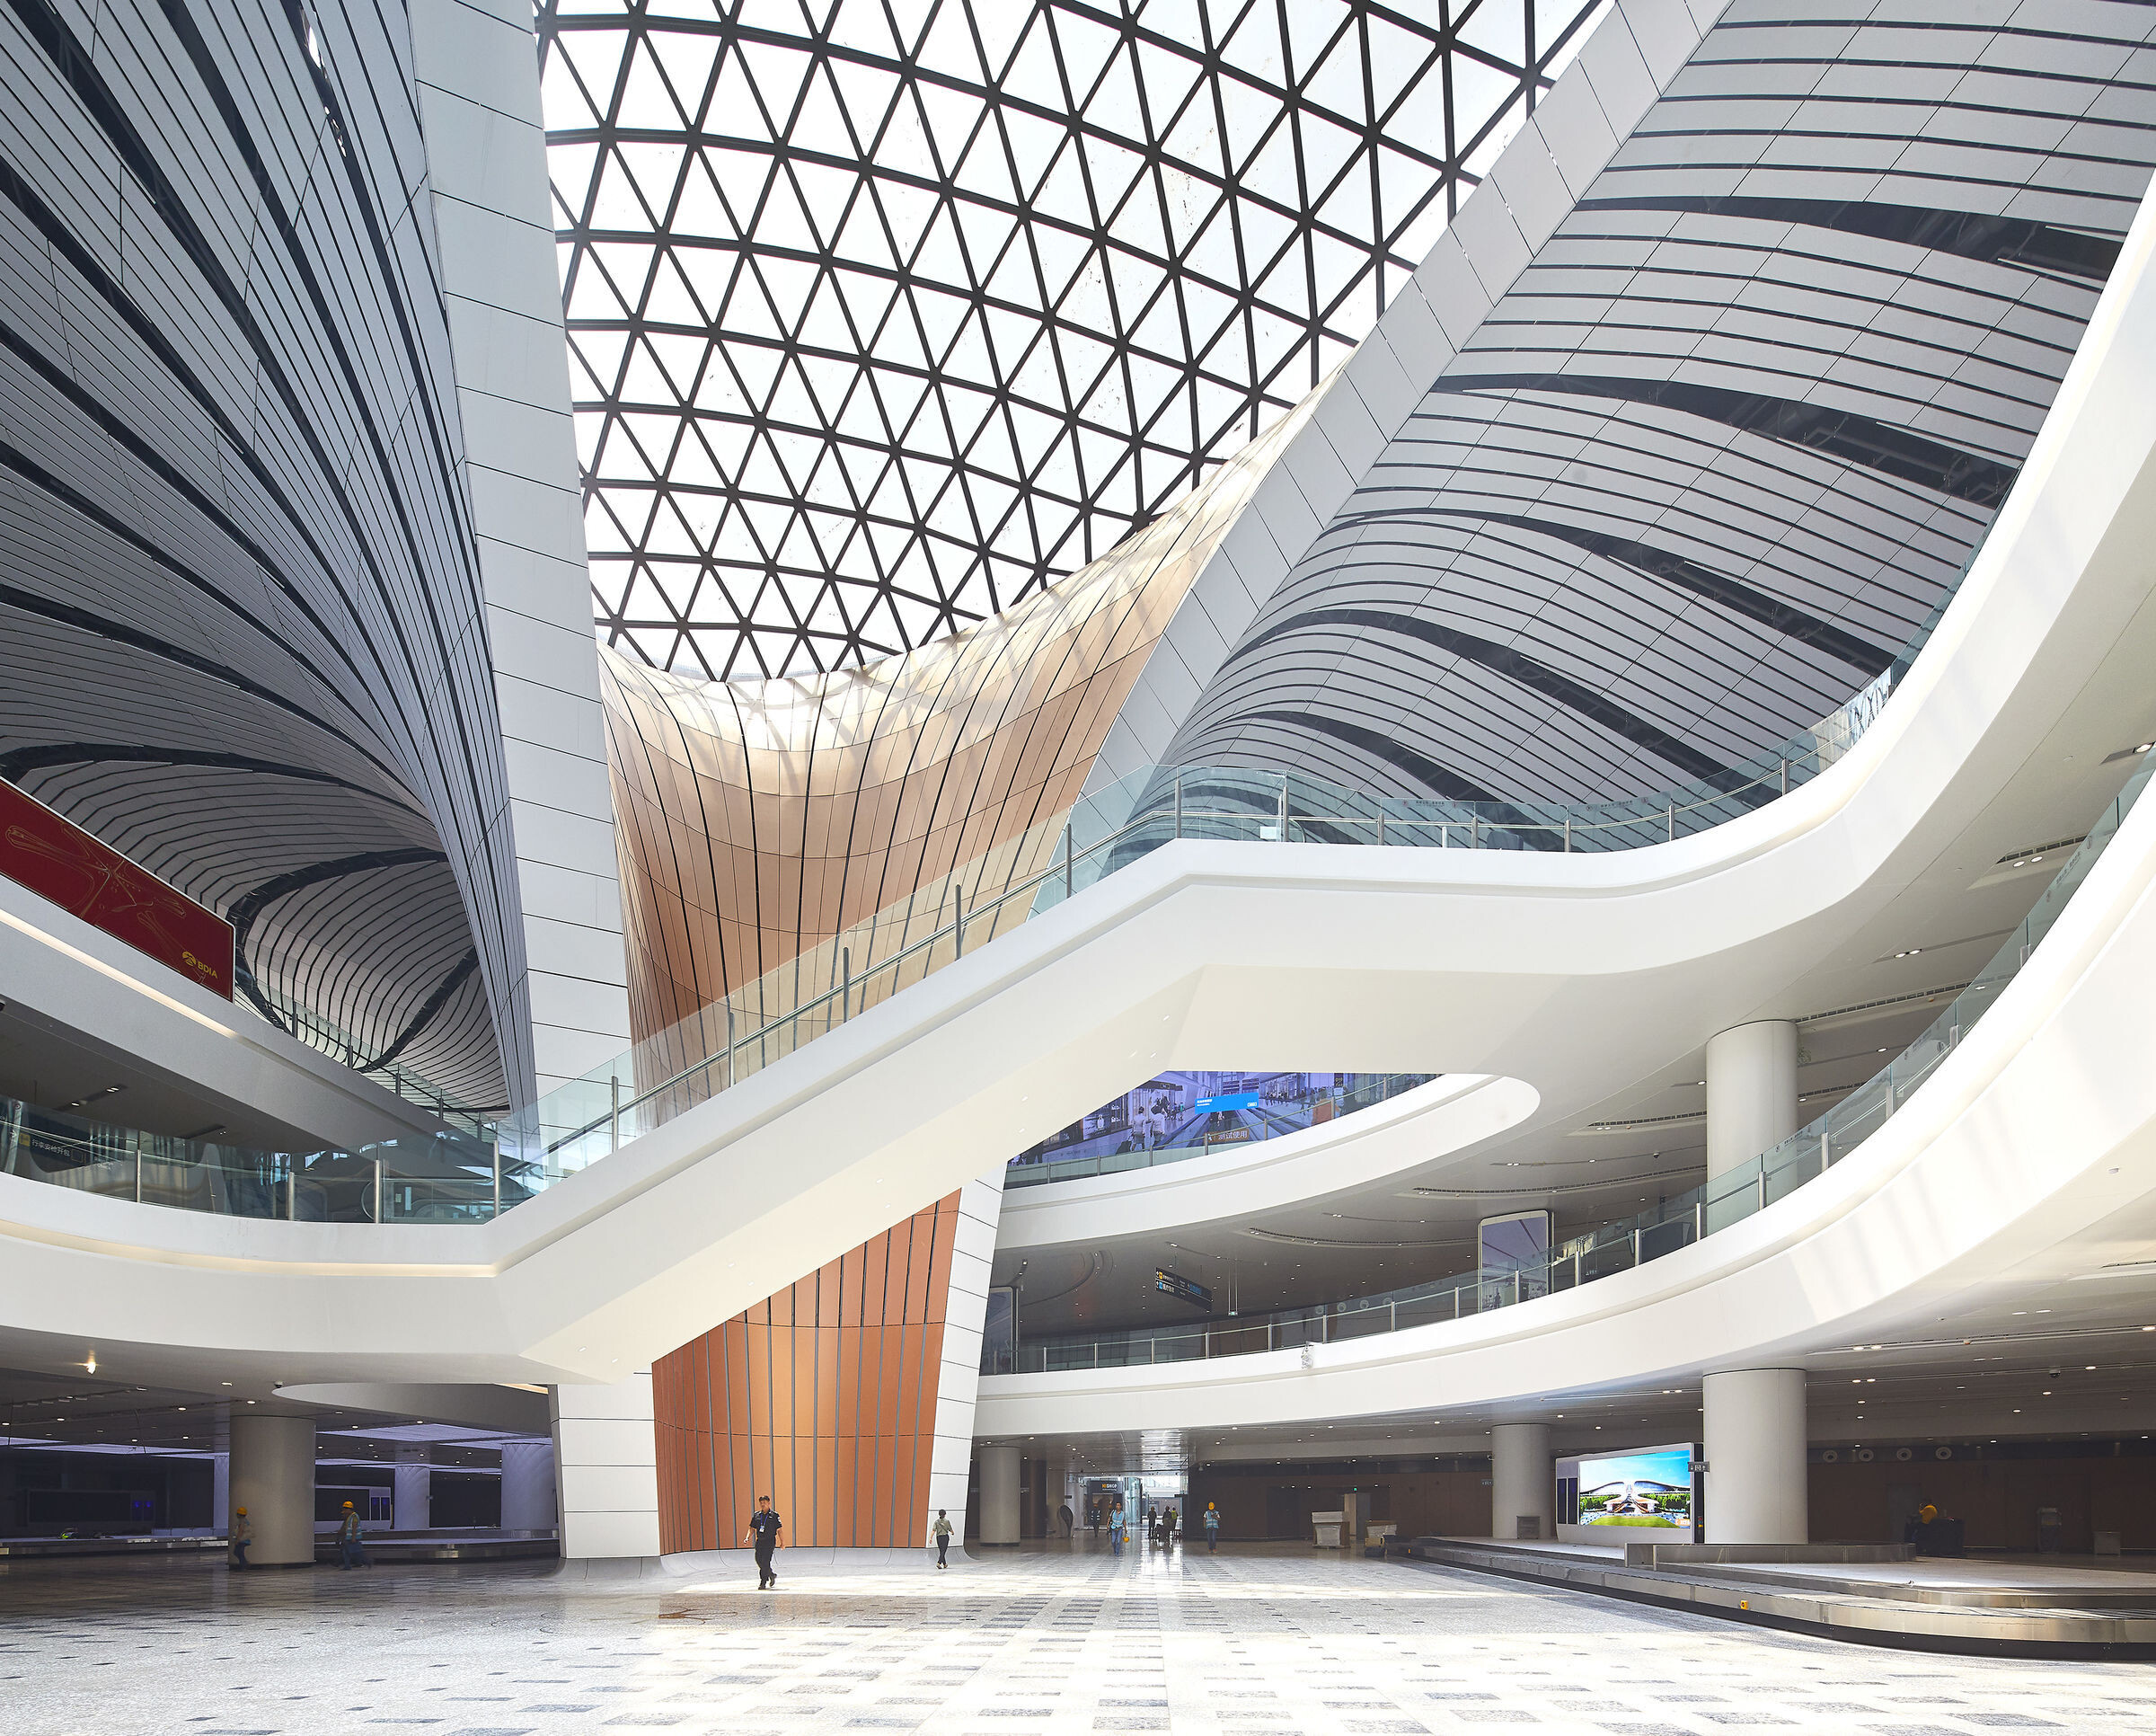 photo_credit photo : Hufton+Crow | project : Beijing Daxing International Airport 